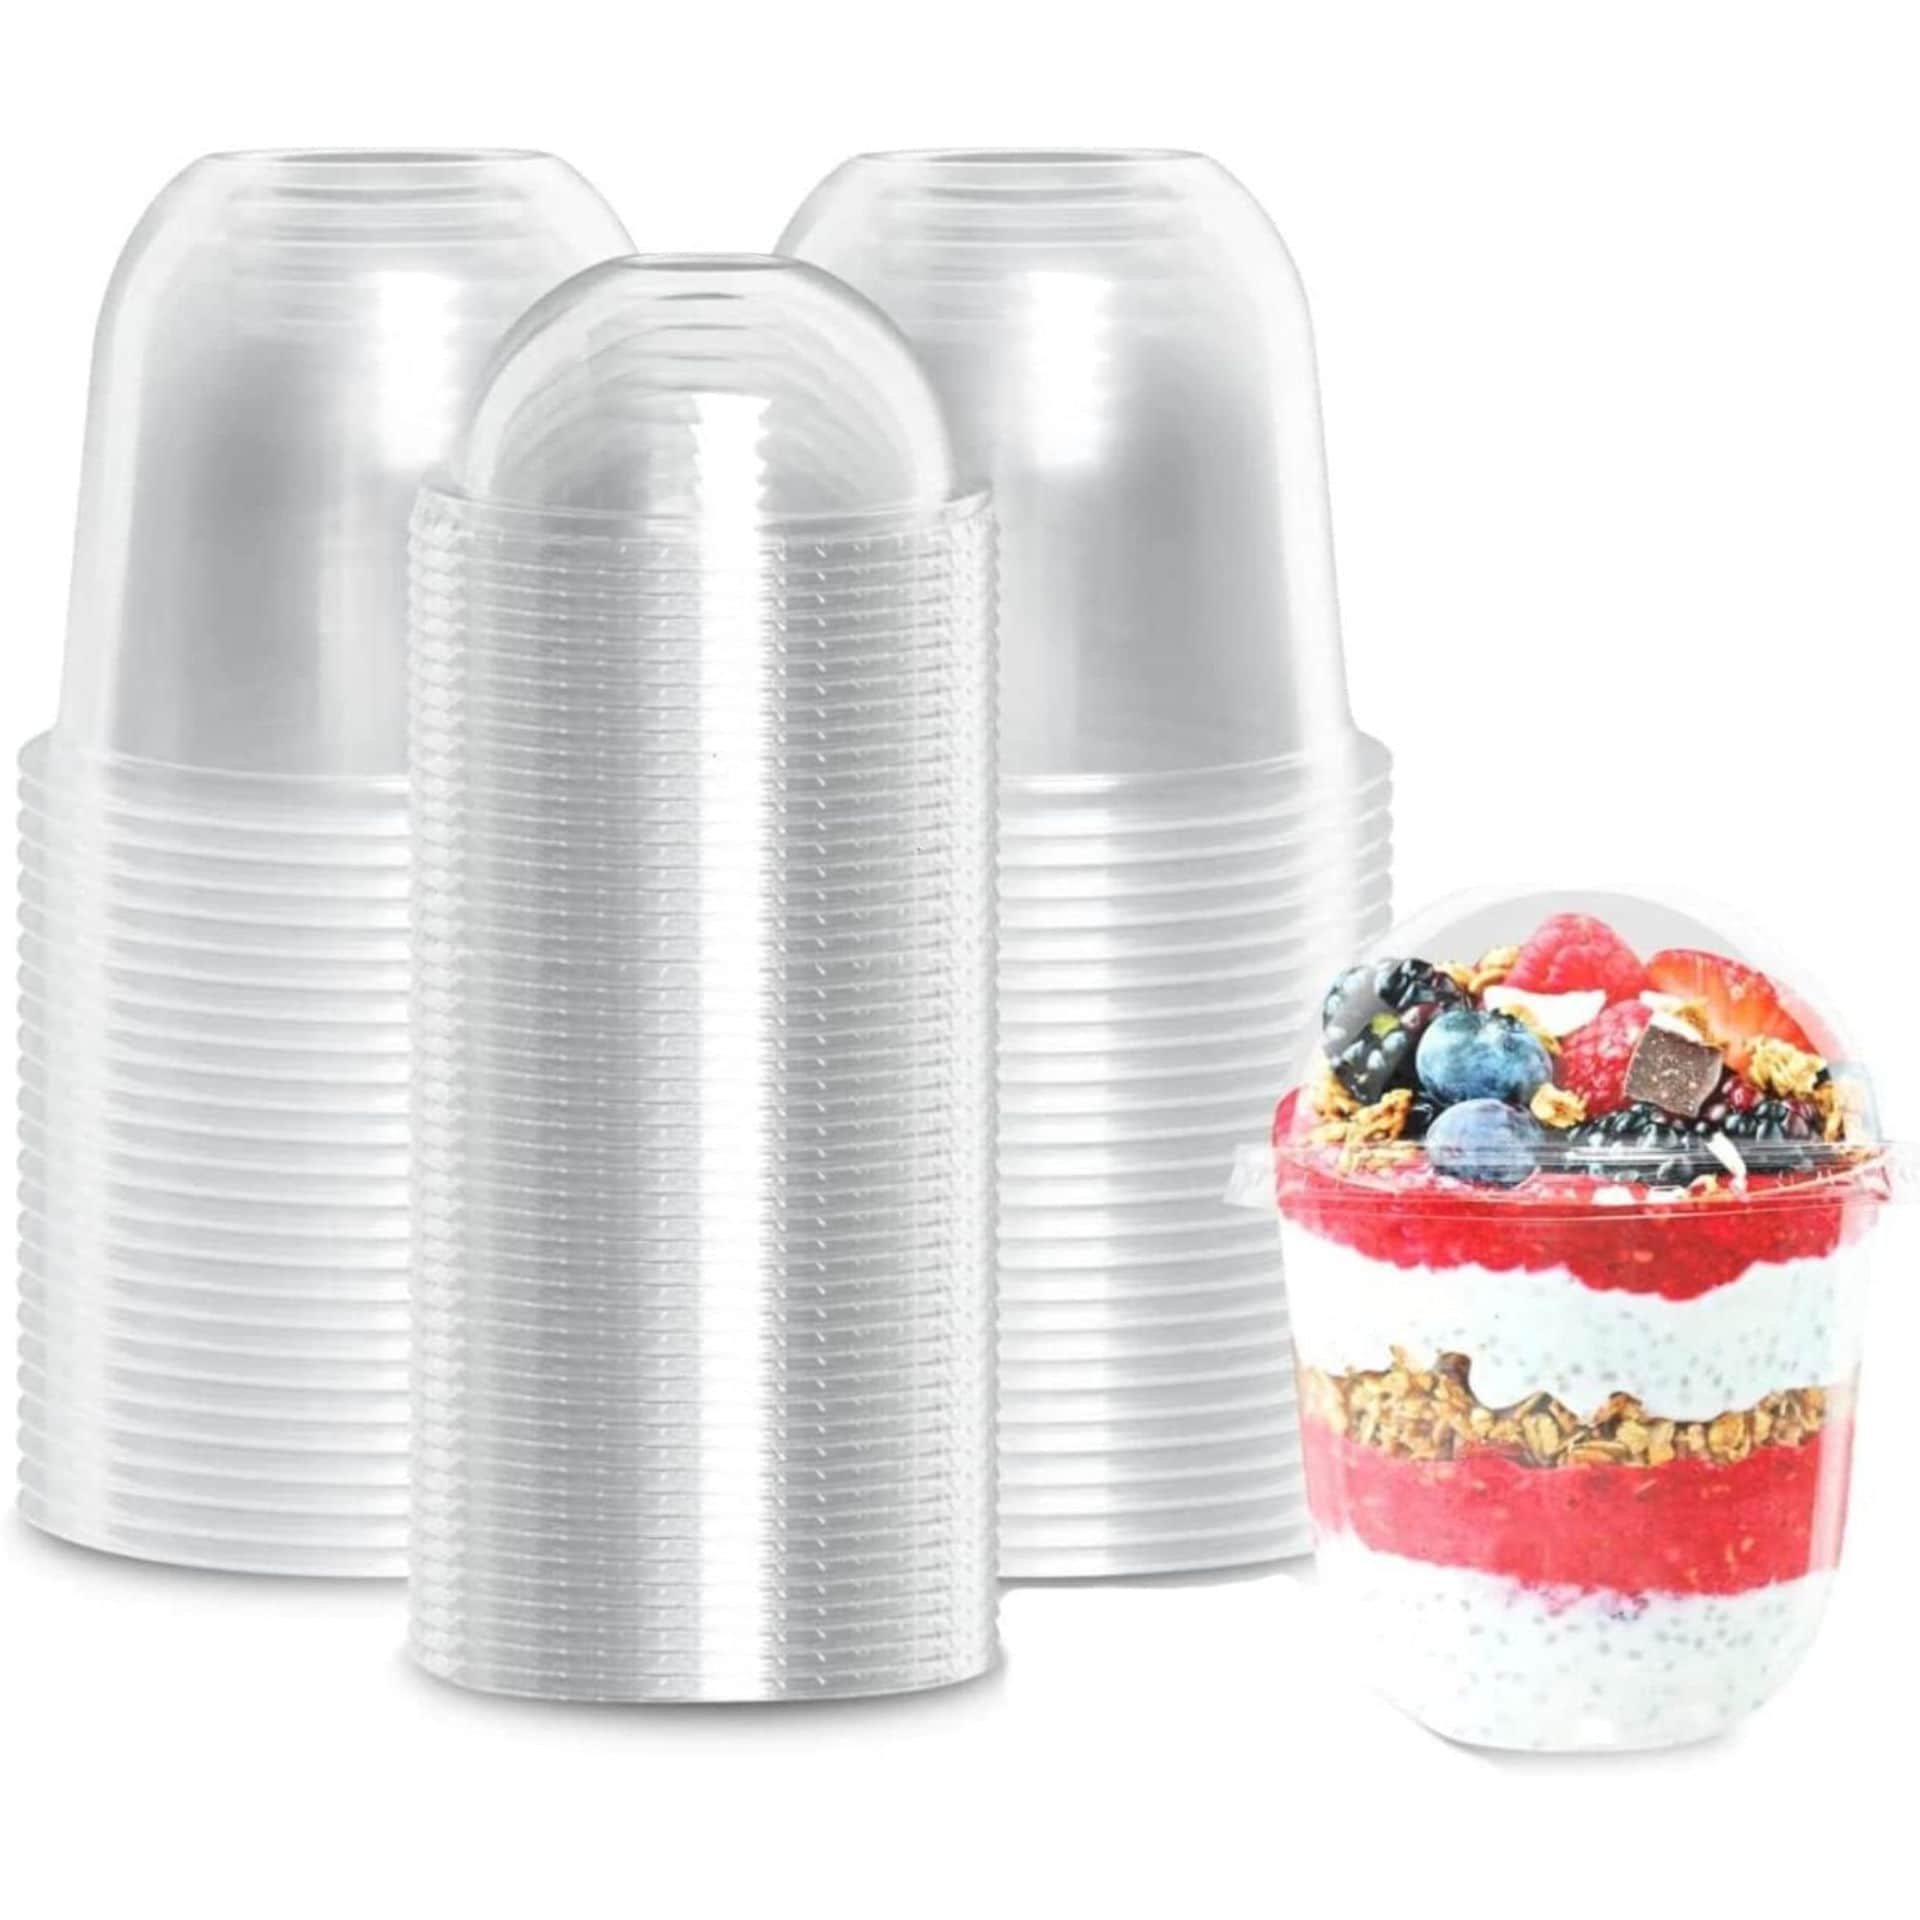 https://assets.dragonmart.ae/pictures/0502739_fufu-plastic-cups-with-dome-lids-500ml.jpeg